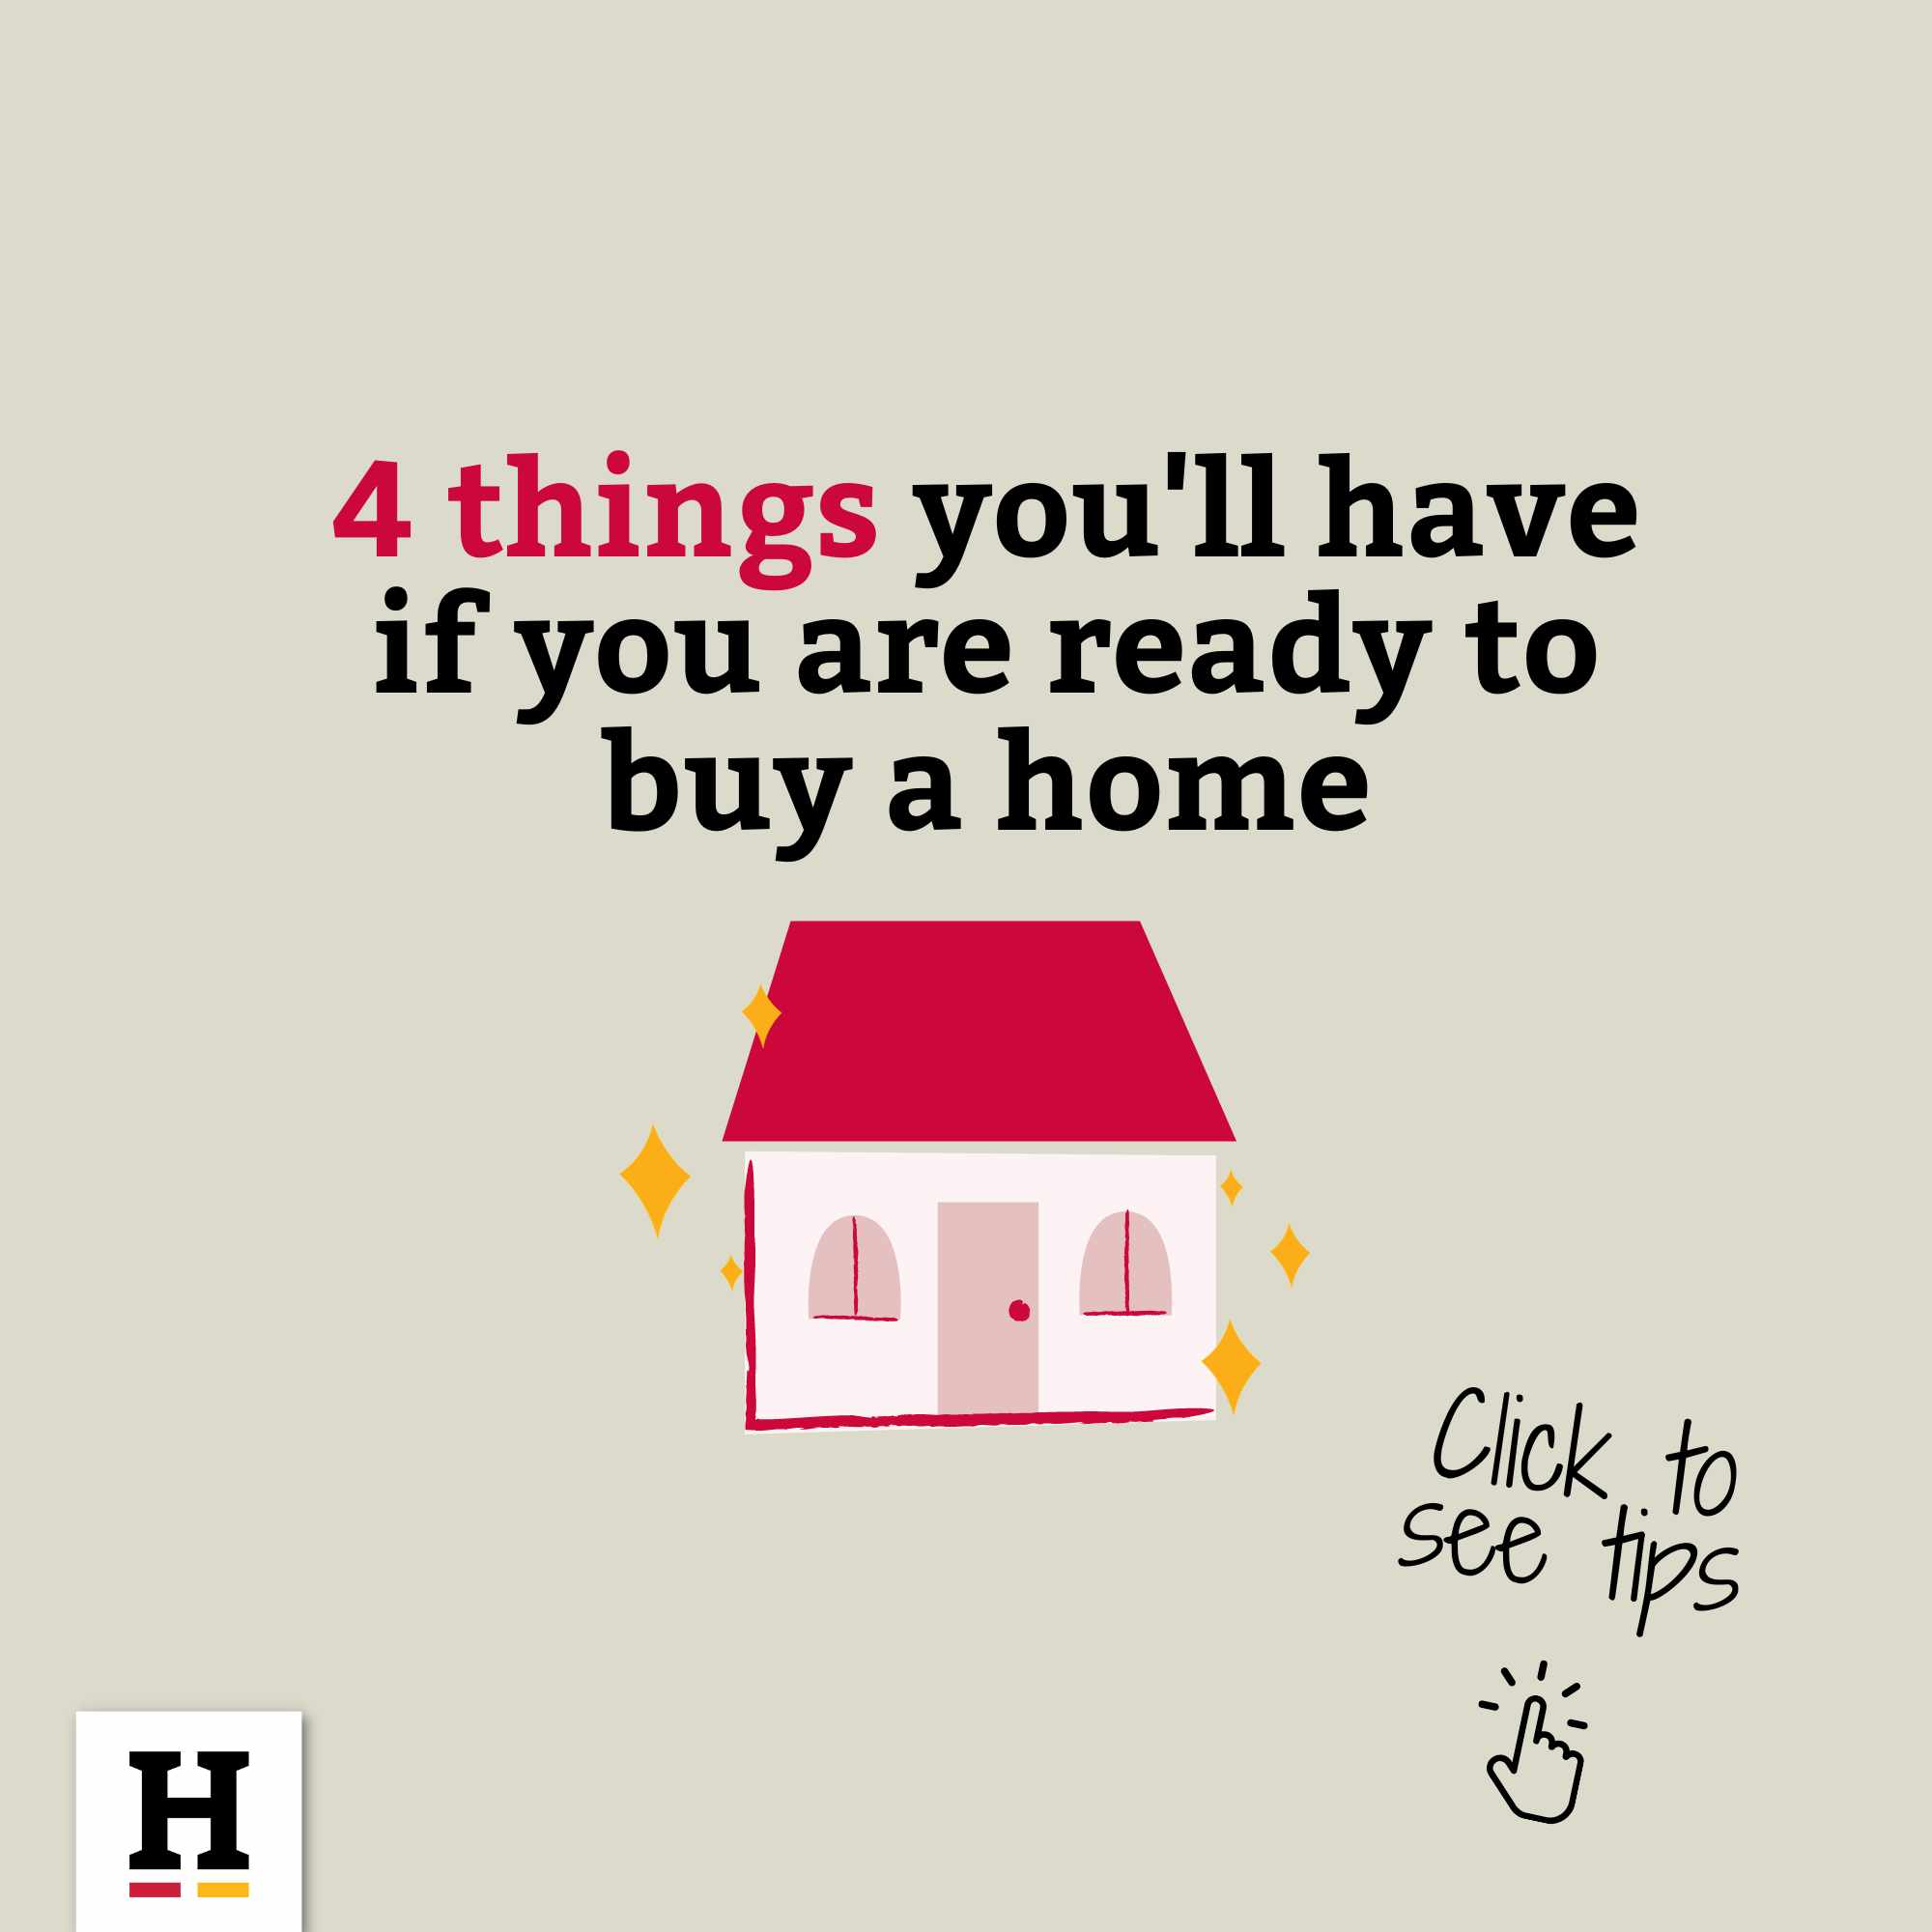 https://www.heritage.com.au/-/media/m/tools/infographics/thumbnails/are-you-ready-to-buy-a-home.jpg?cx=0.5&cy=0.5&cw=2000&ch=2000&hash=6D3688FBB1846E4745B9044452B872815E2E7695